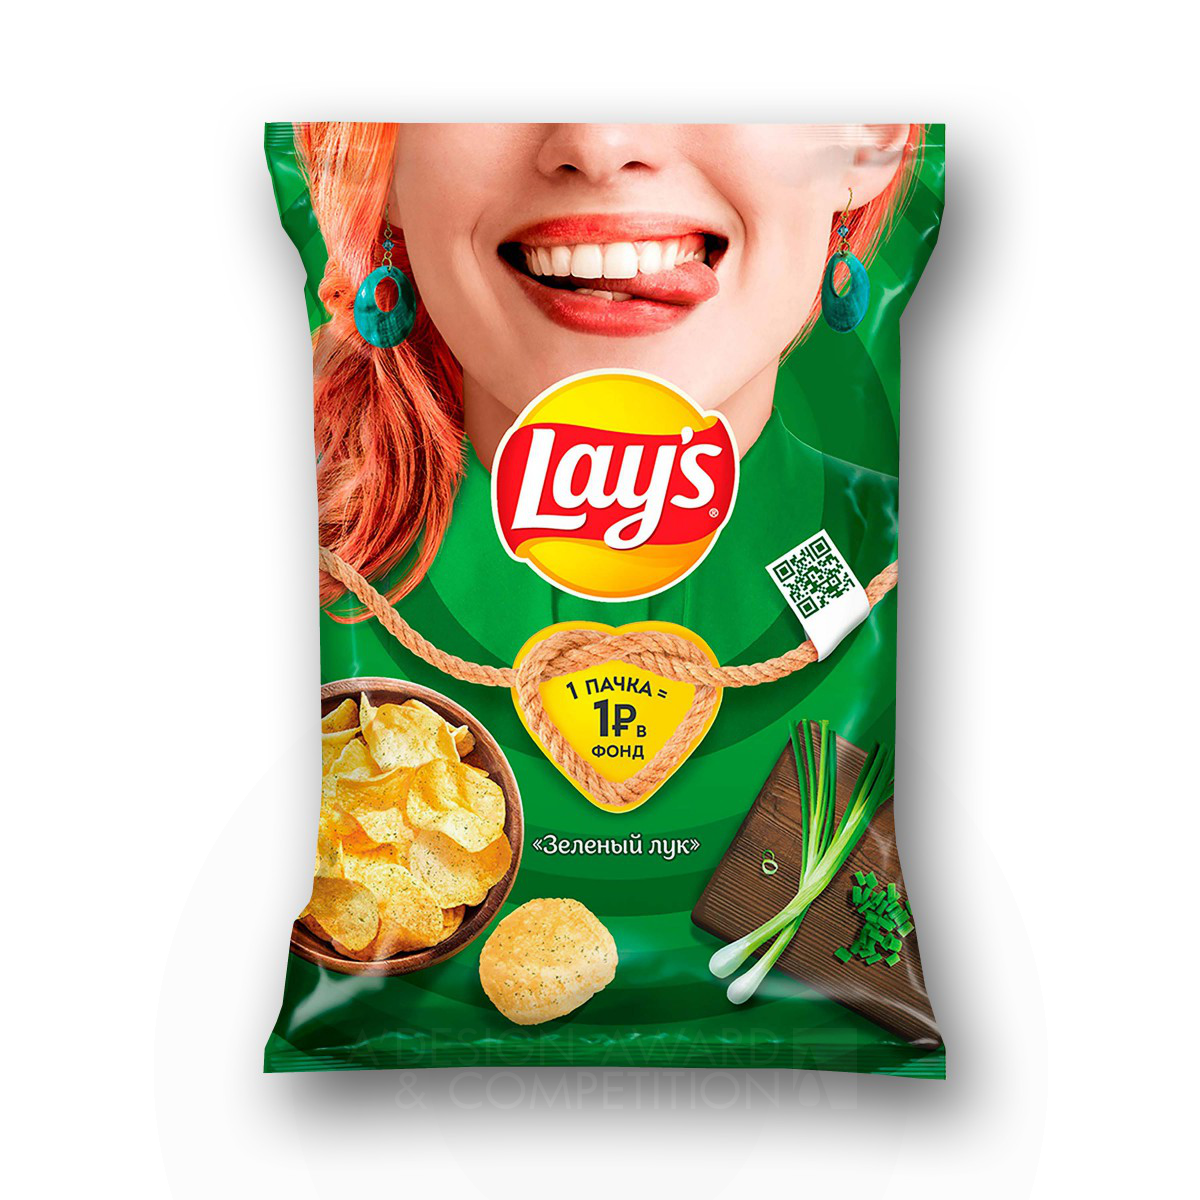 Lay's Smiles Campaign Food Packaging by PepsiCo Design & Innovation